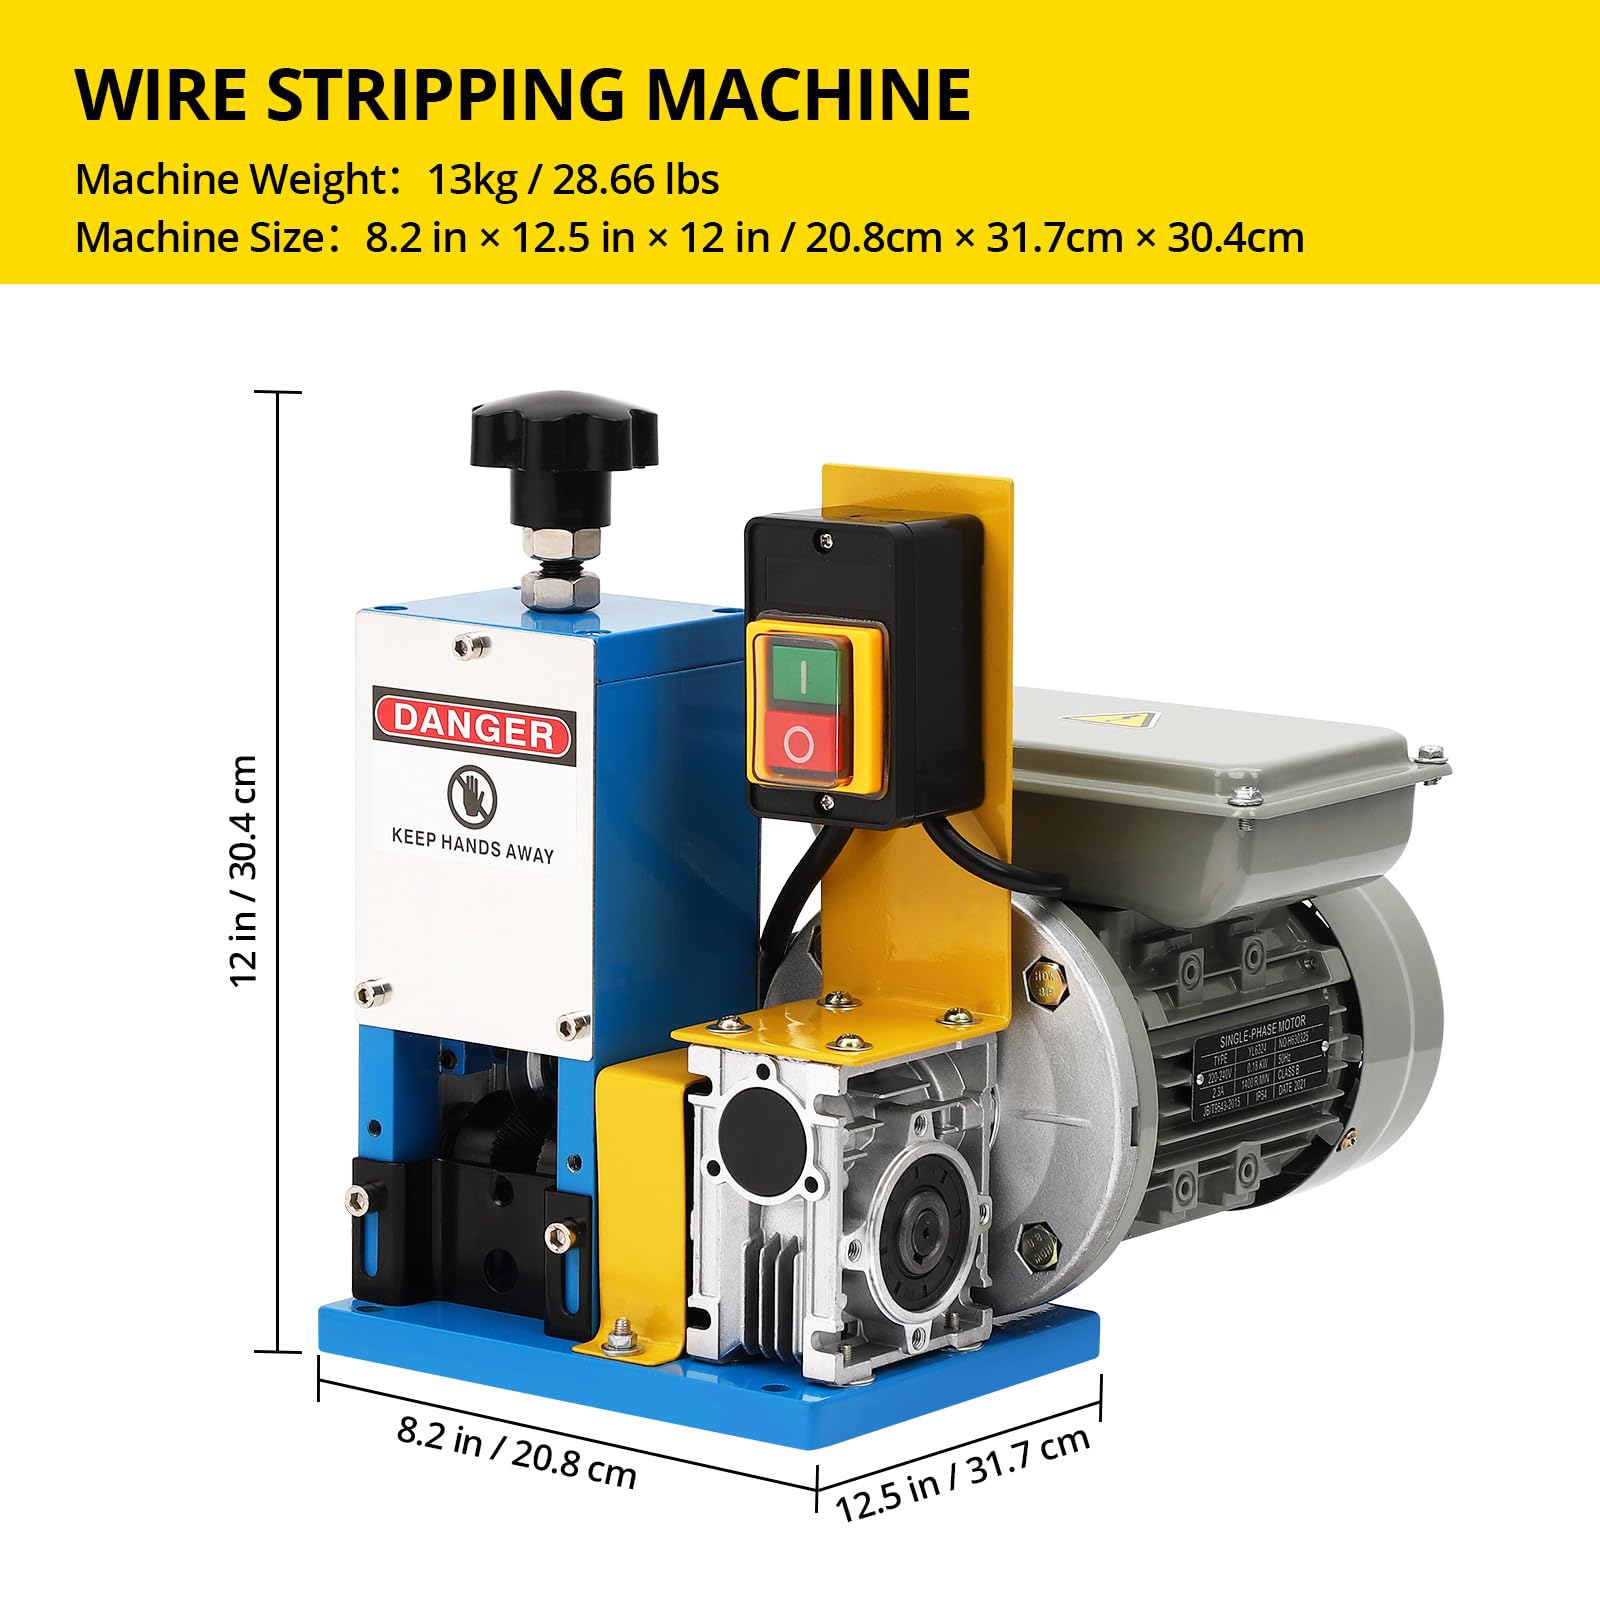 Electric Wire Stripper 1.5-25mm, 60 ft/min, for Cable Recycling